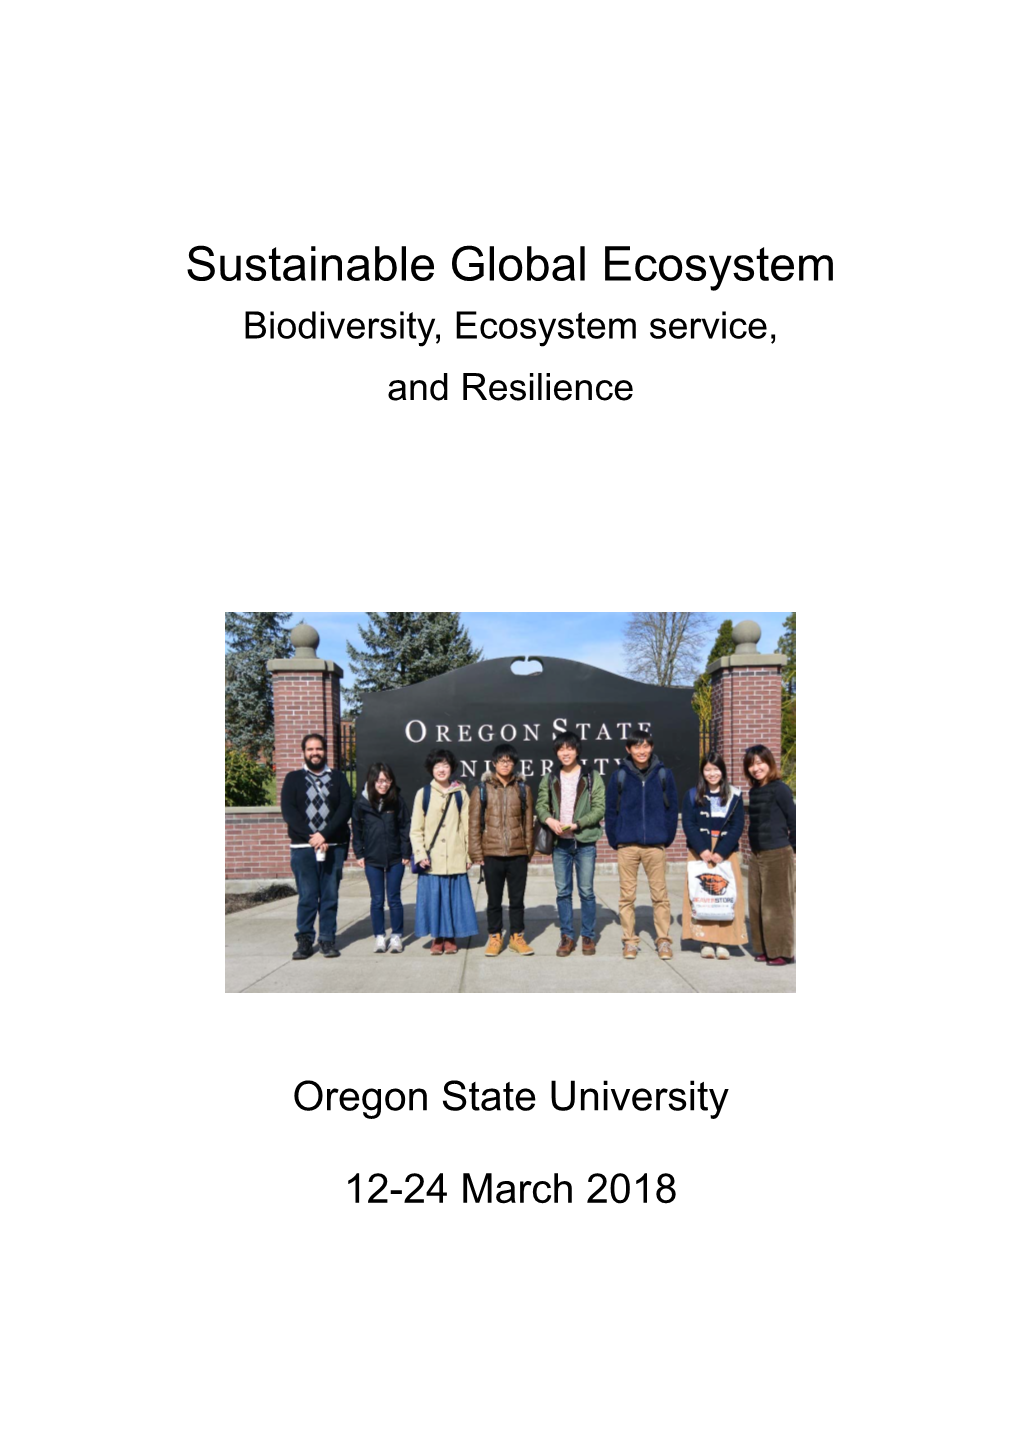 Sustainable Global Ecosystem Biodiversity, Ecosystem Service, and Resilience